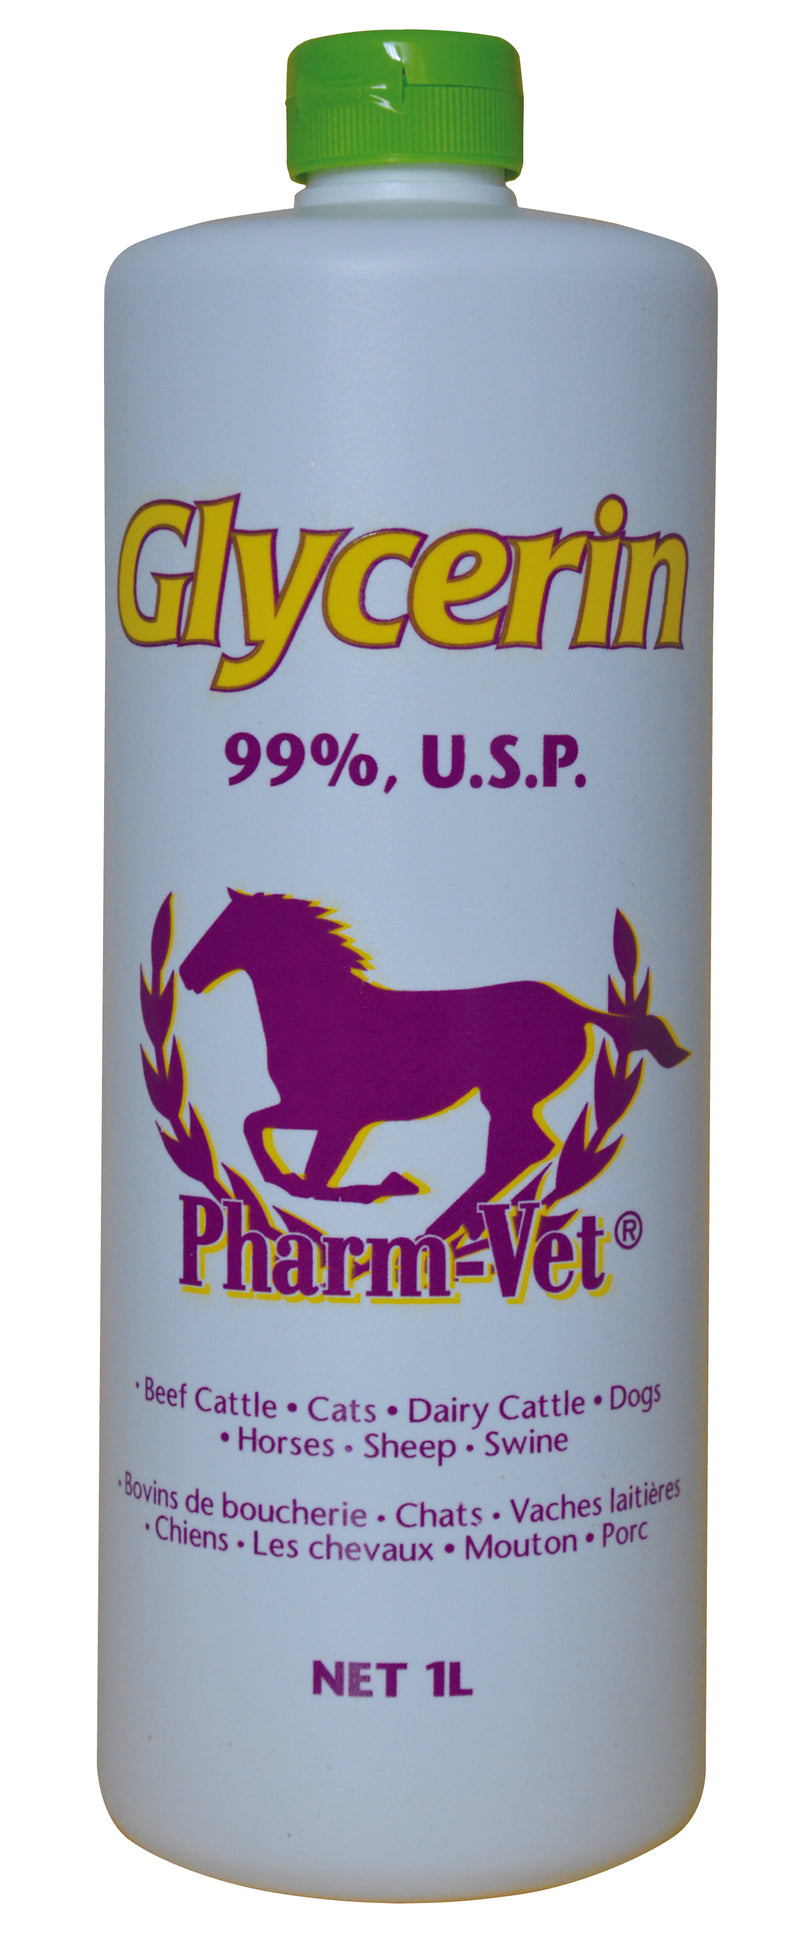 GLYCERIN 1L functions as a humectant, preservative and lubricant